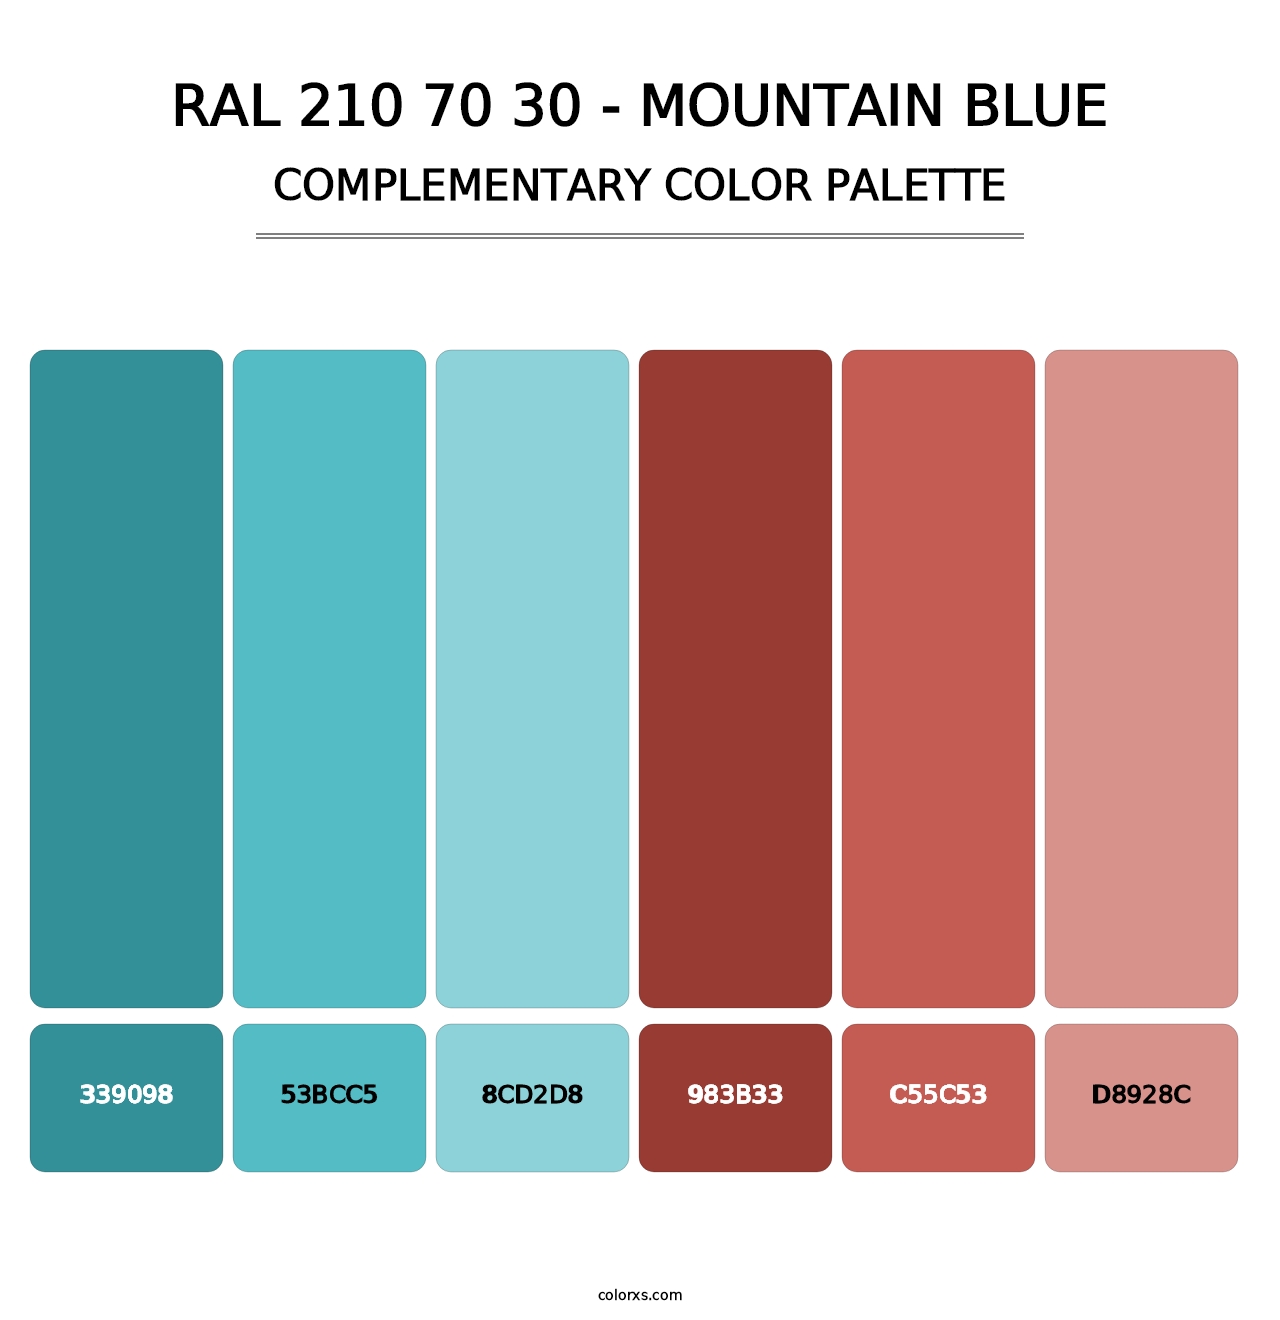 RAL 210 70 30 - Mountain Blue - Complementary Color Palette